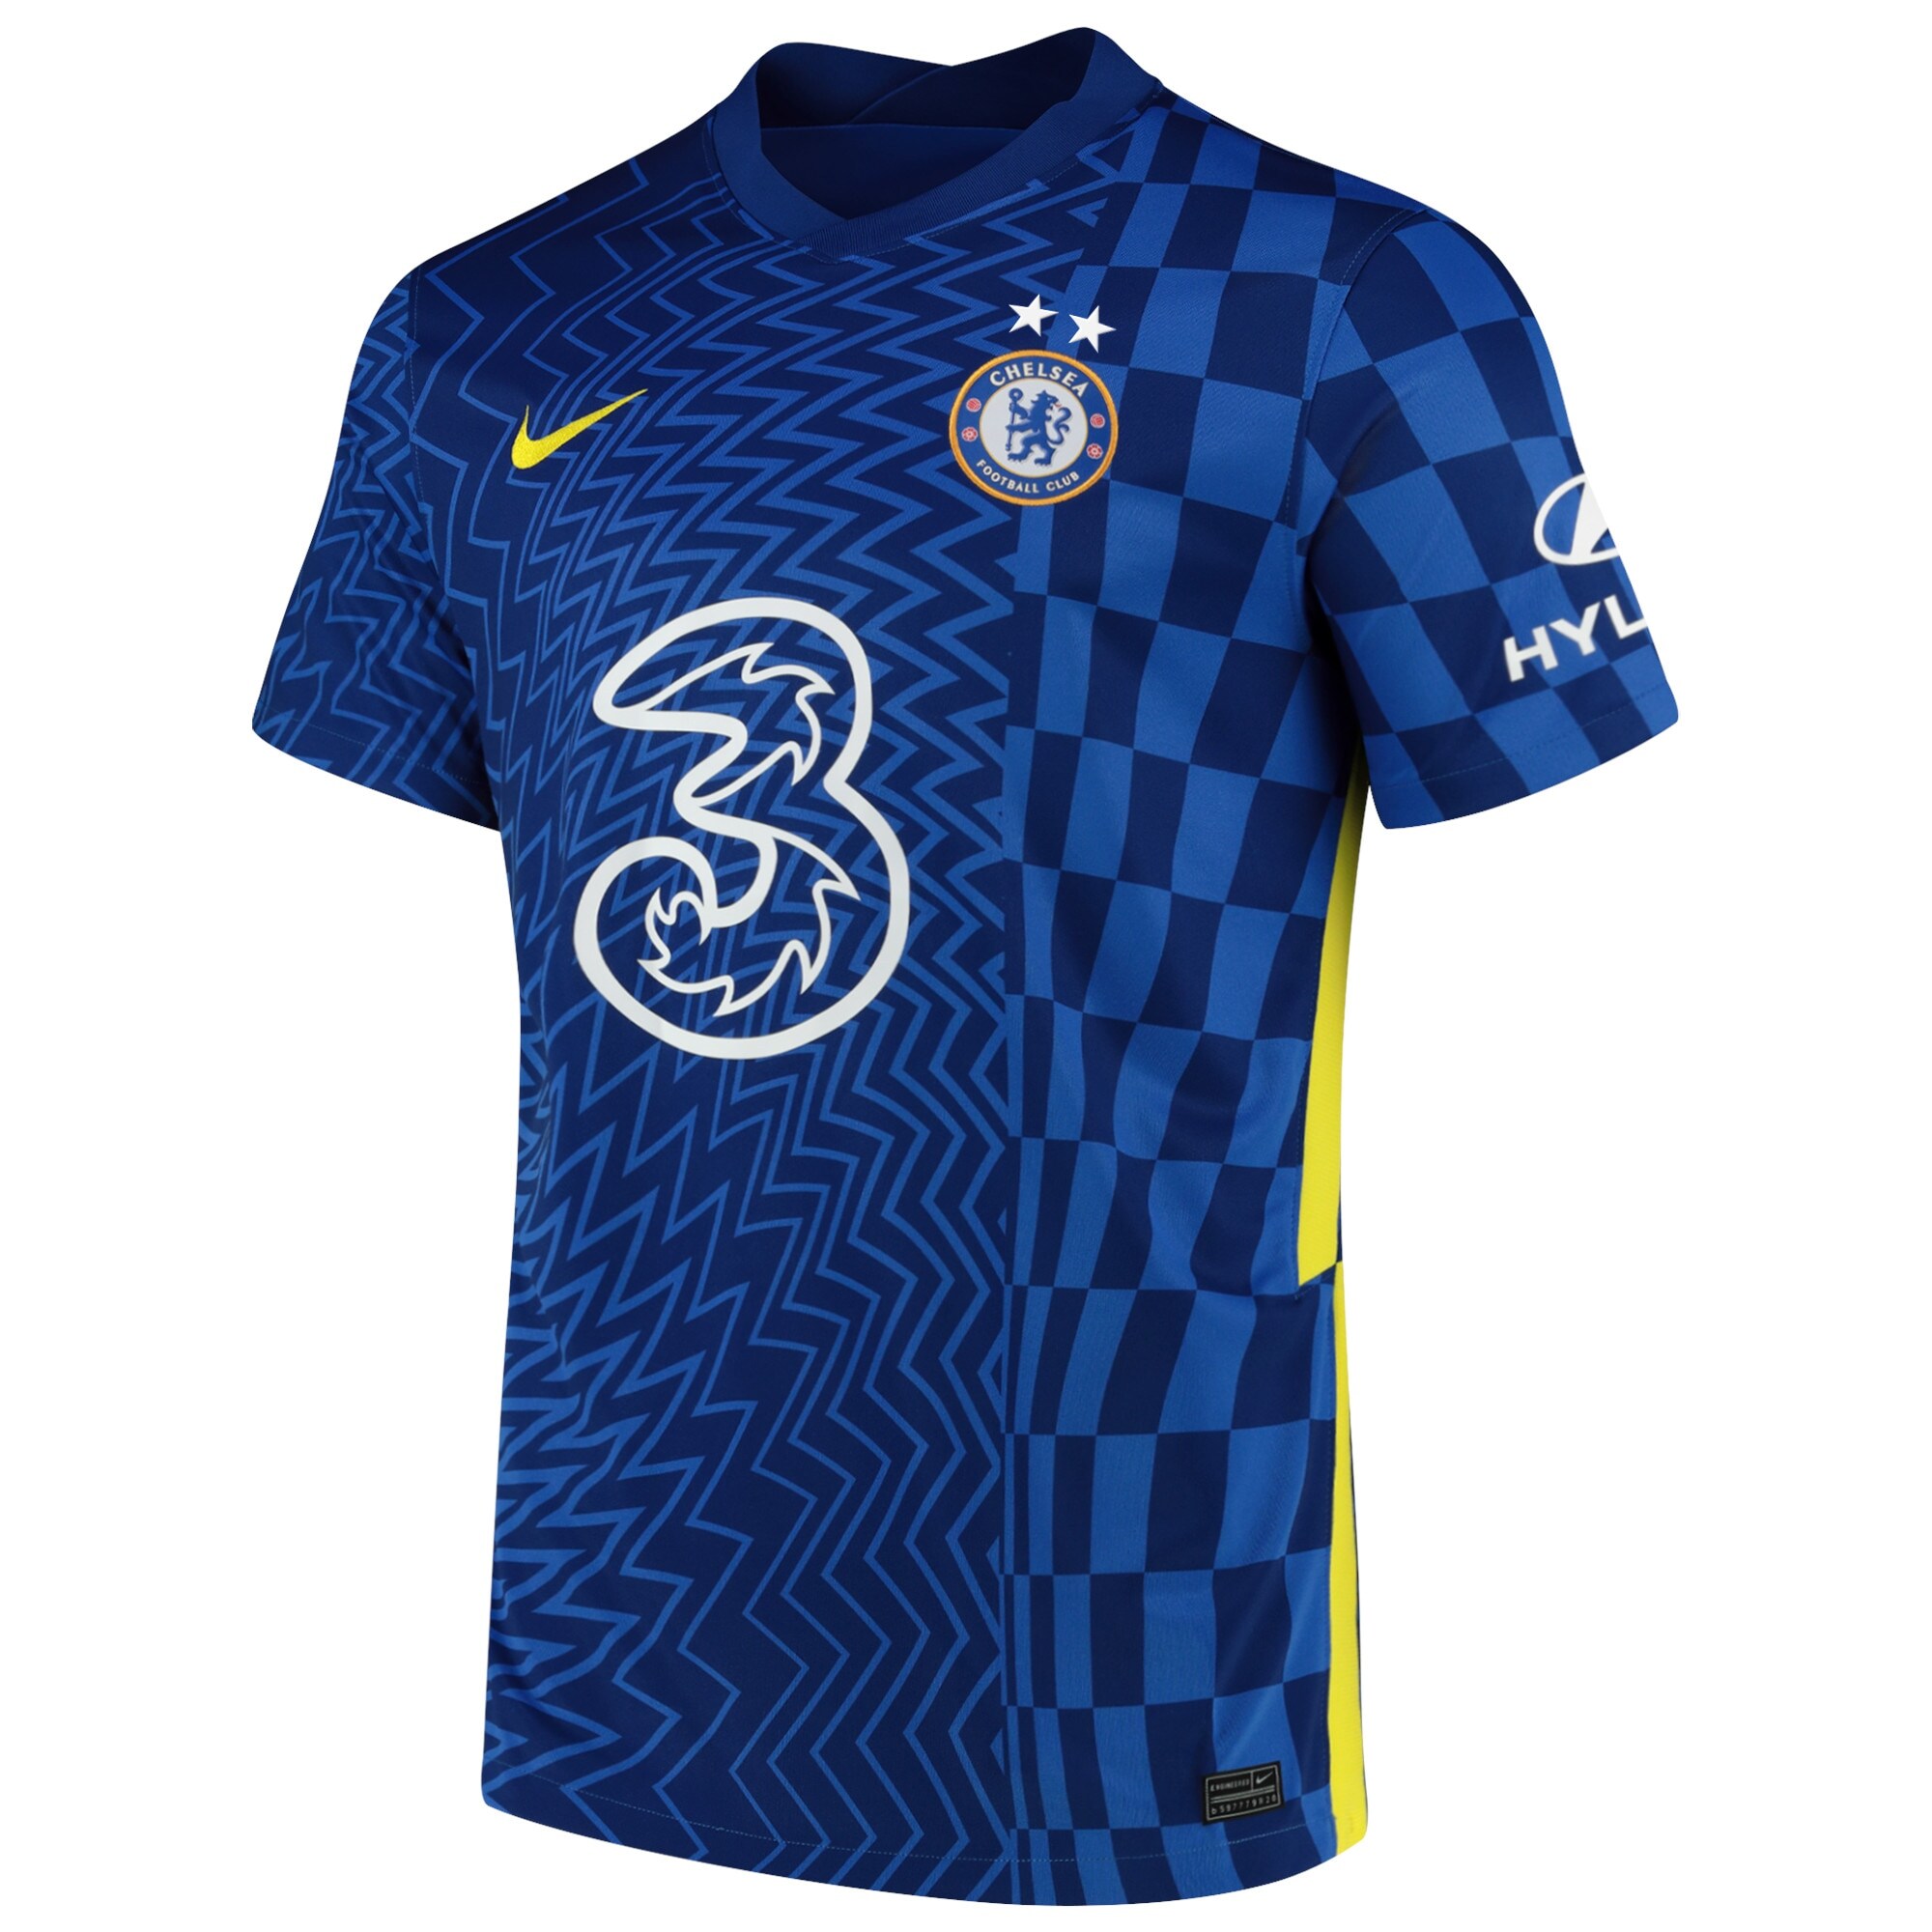 Chelsea Cup Home Stadium Shirt 2021-22 with Champions of Europe 21 printing